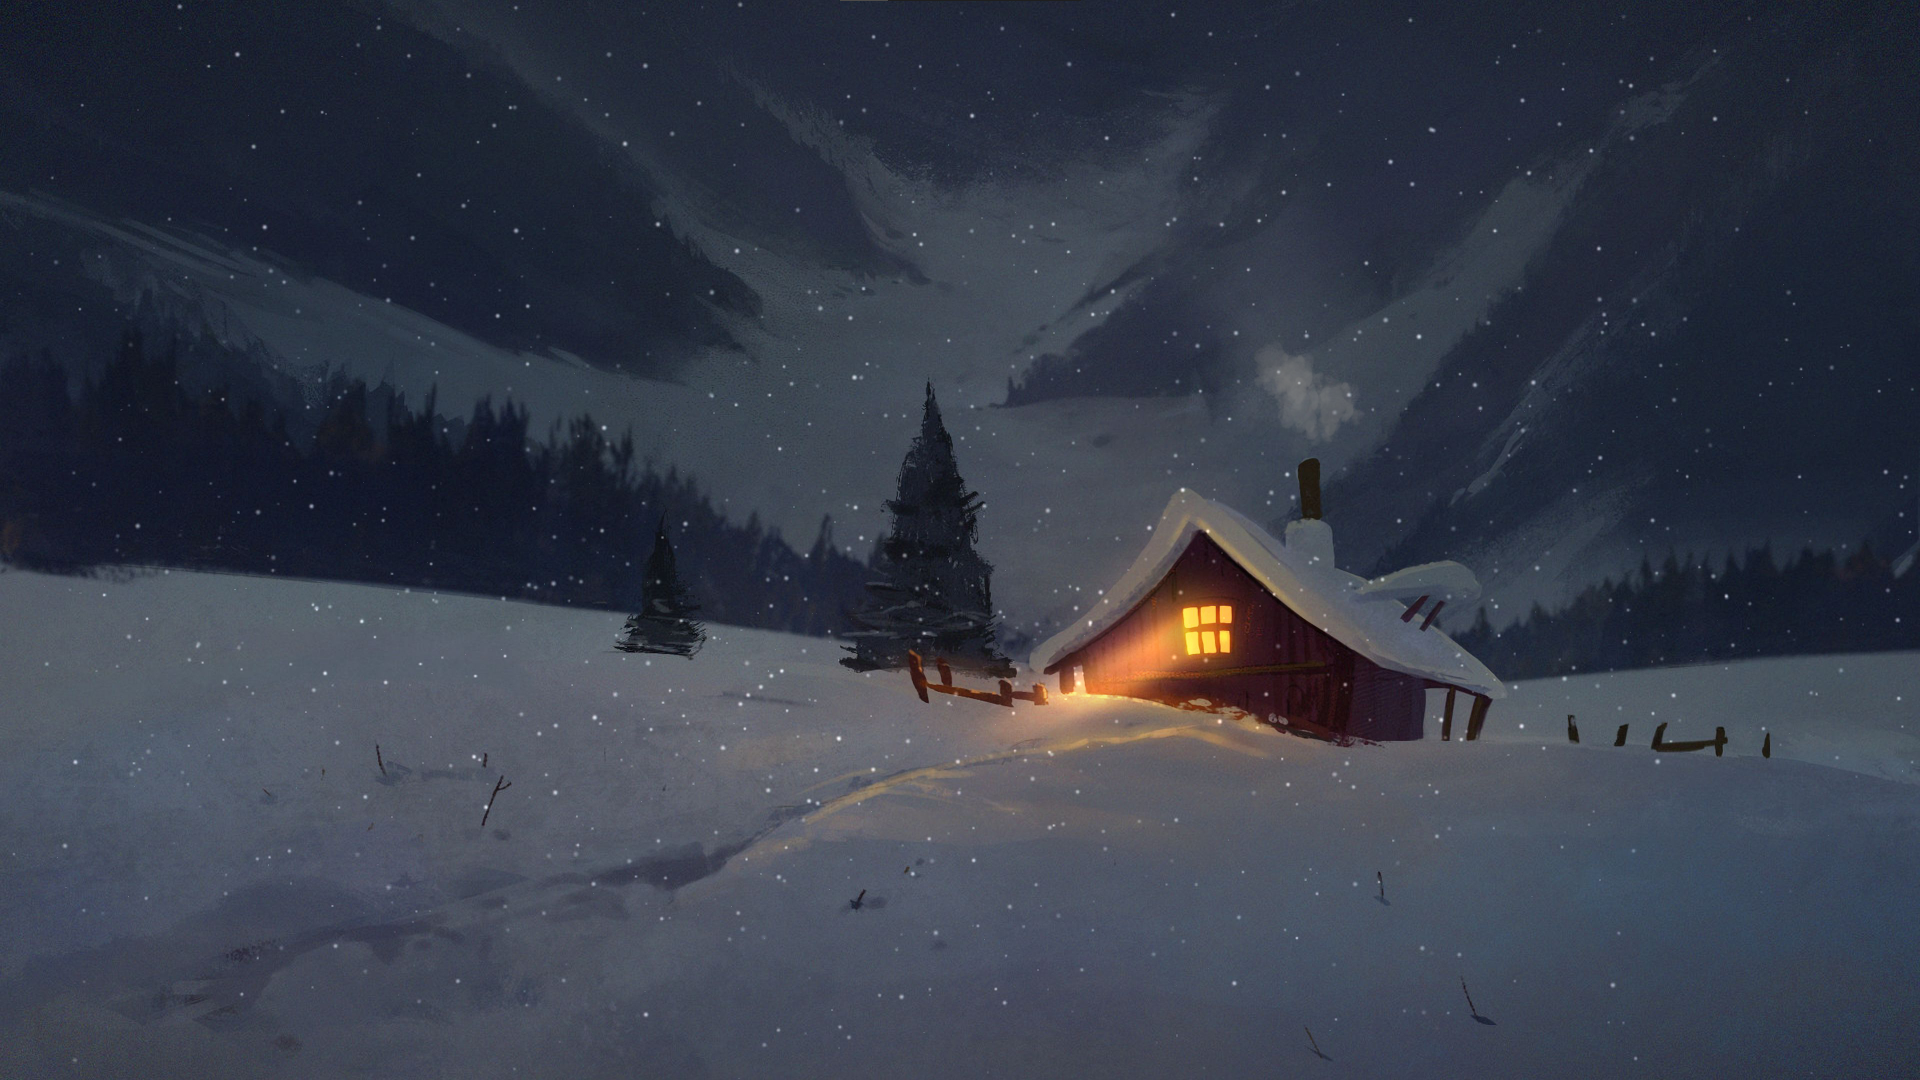 General 1920x1080 cabin snow night forest isolated sky snowing digital art snow covered outdoors winter stars trees